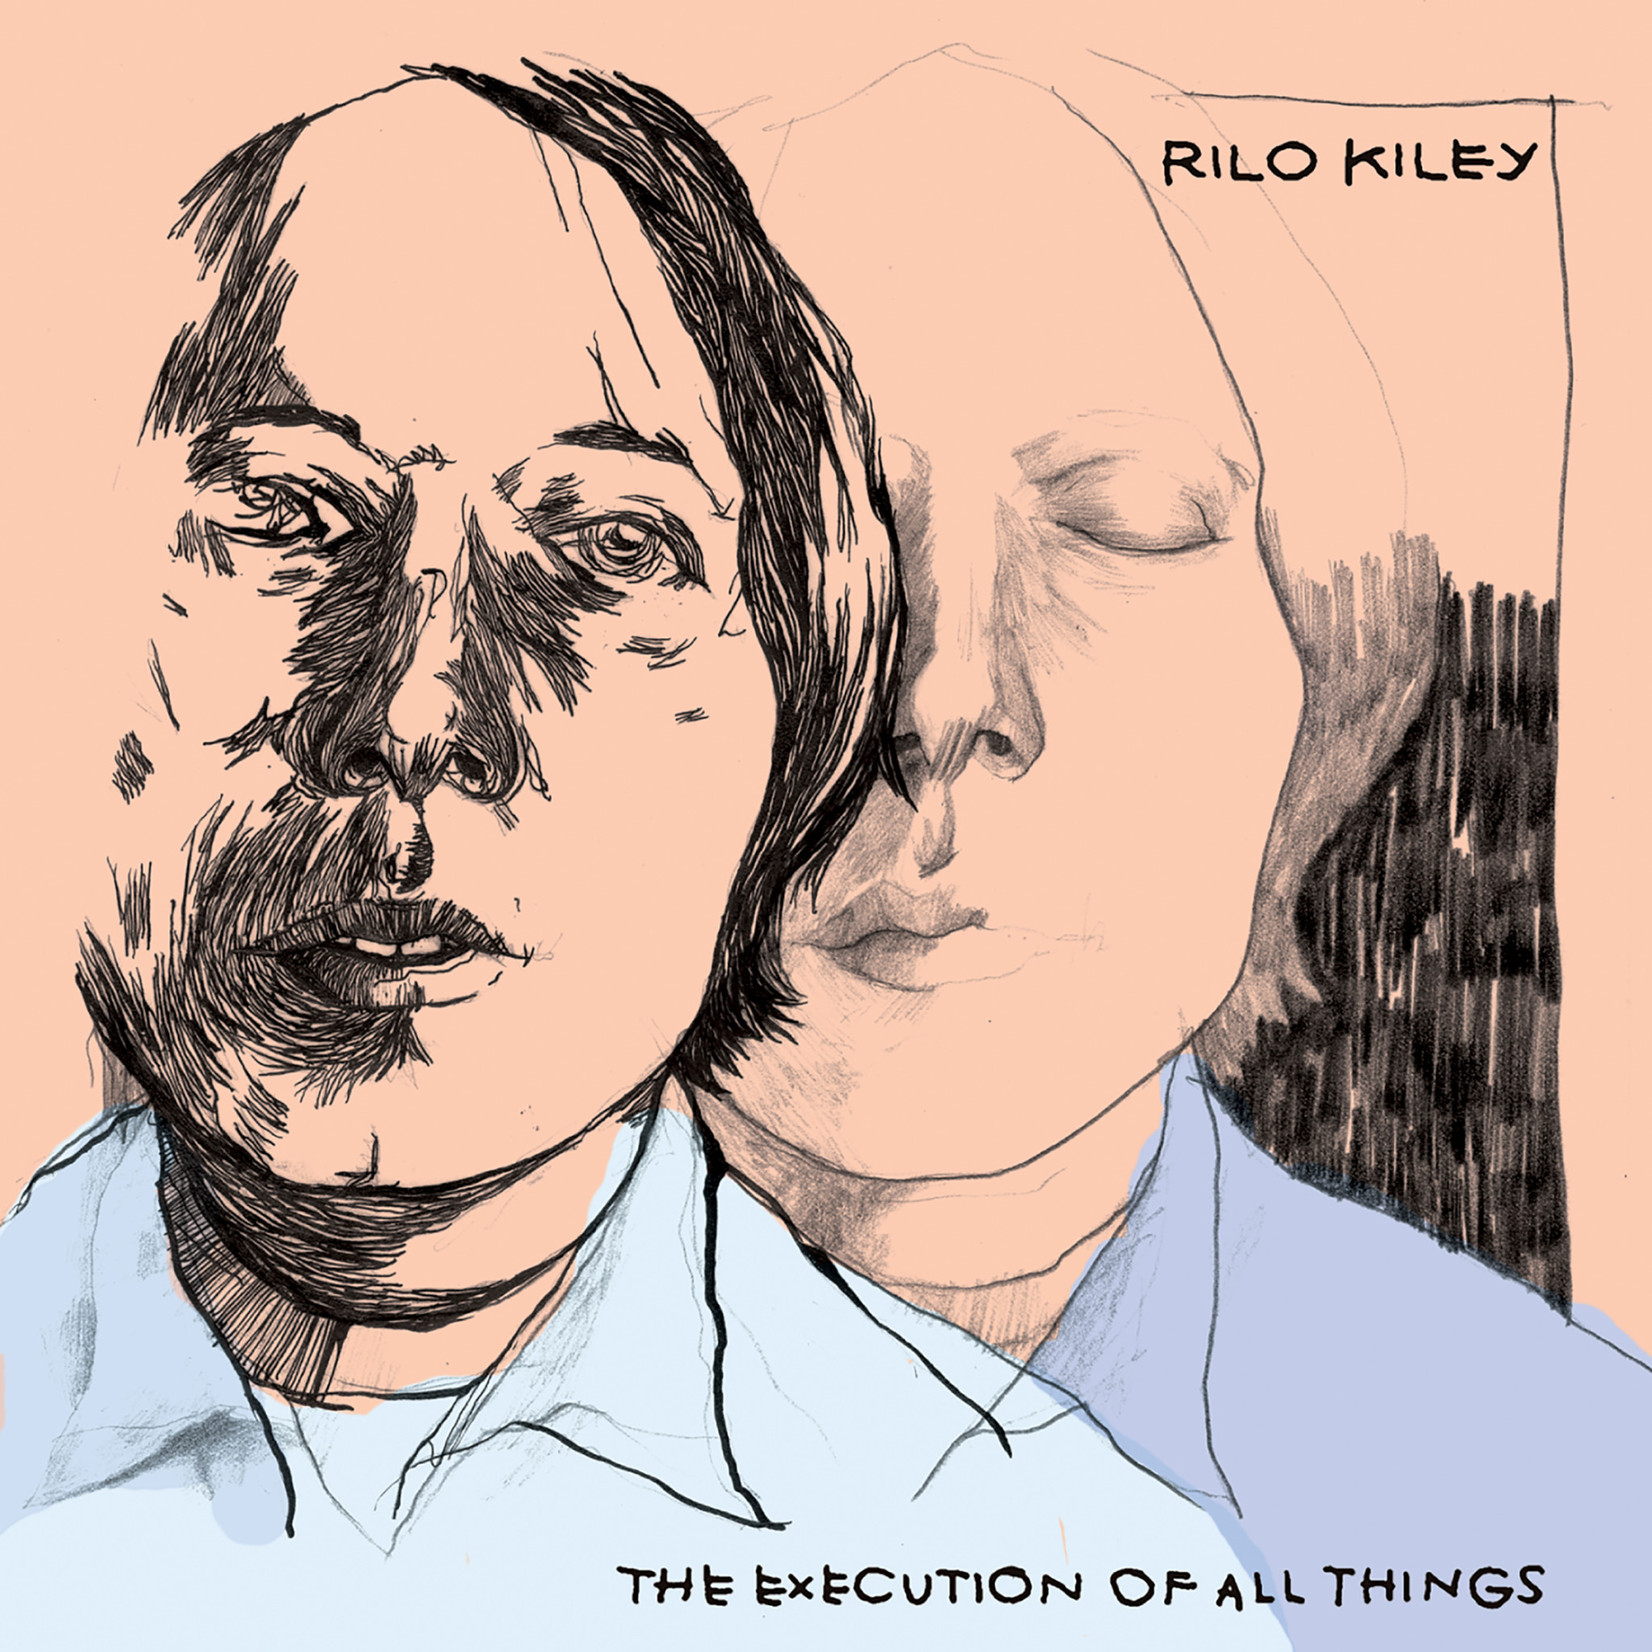 Saddle Creek Rilo Kiley - The Execution Of All Things (LP)